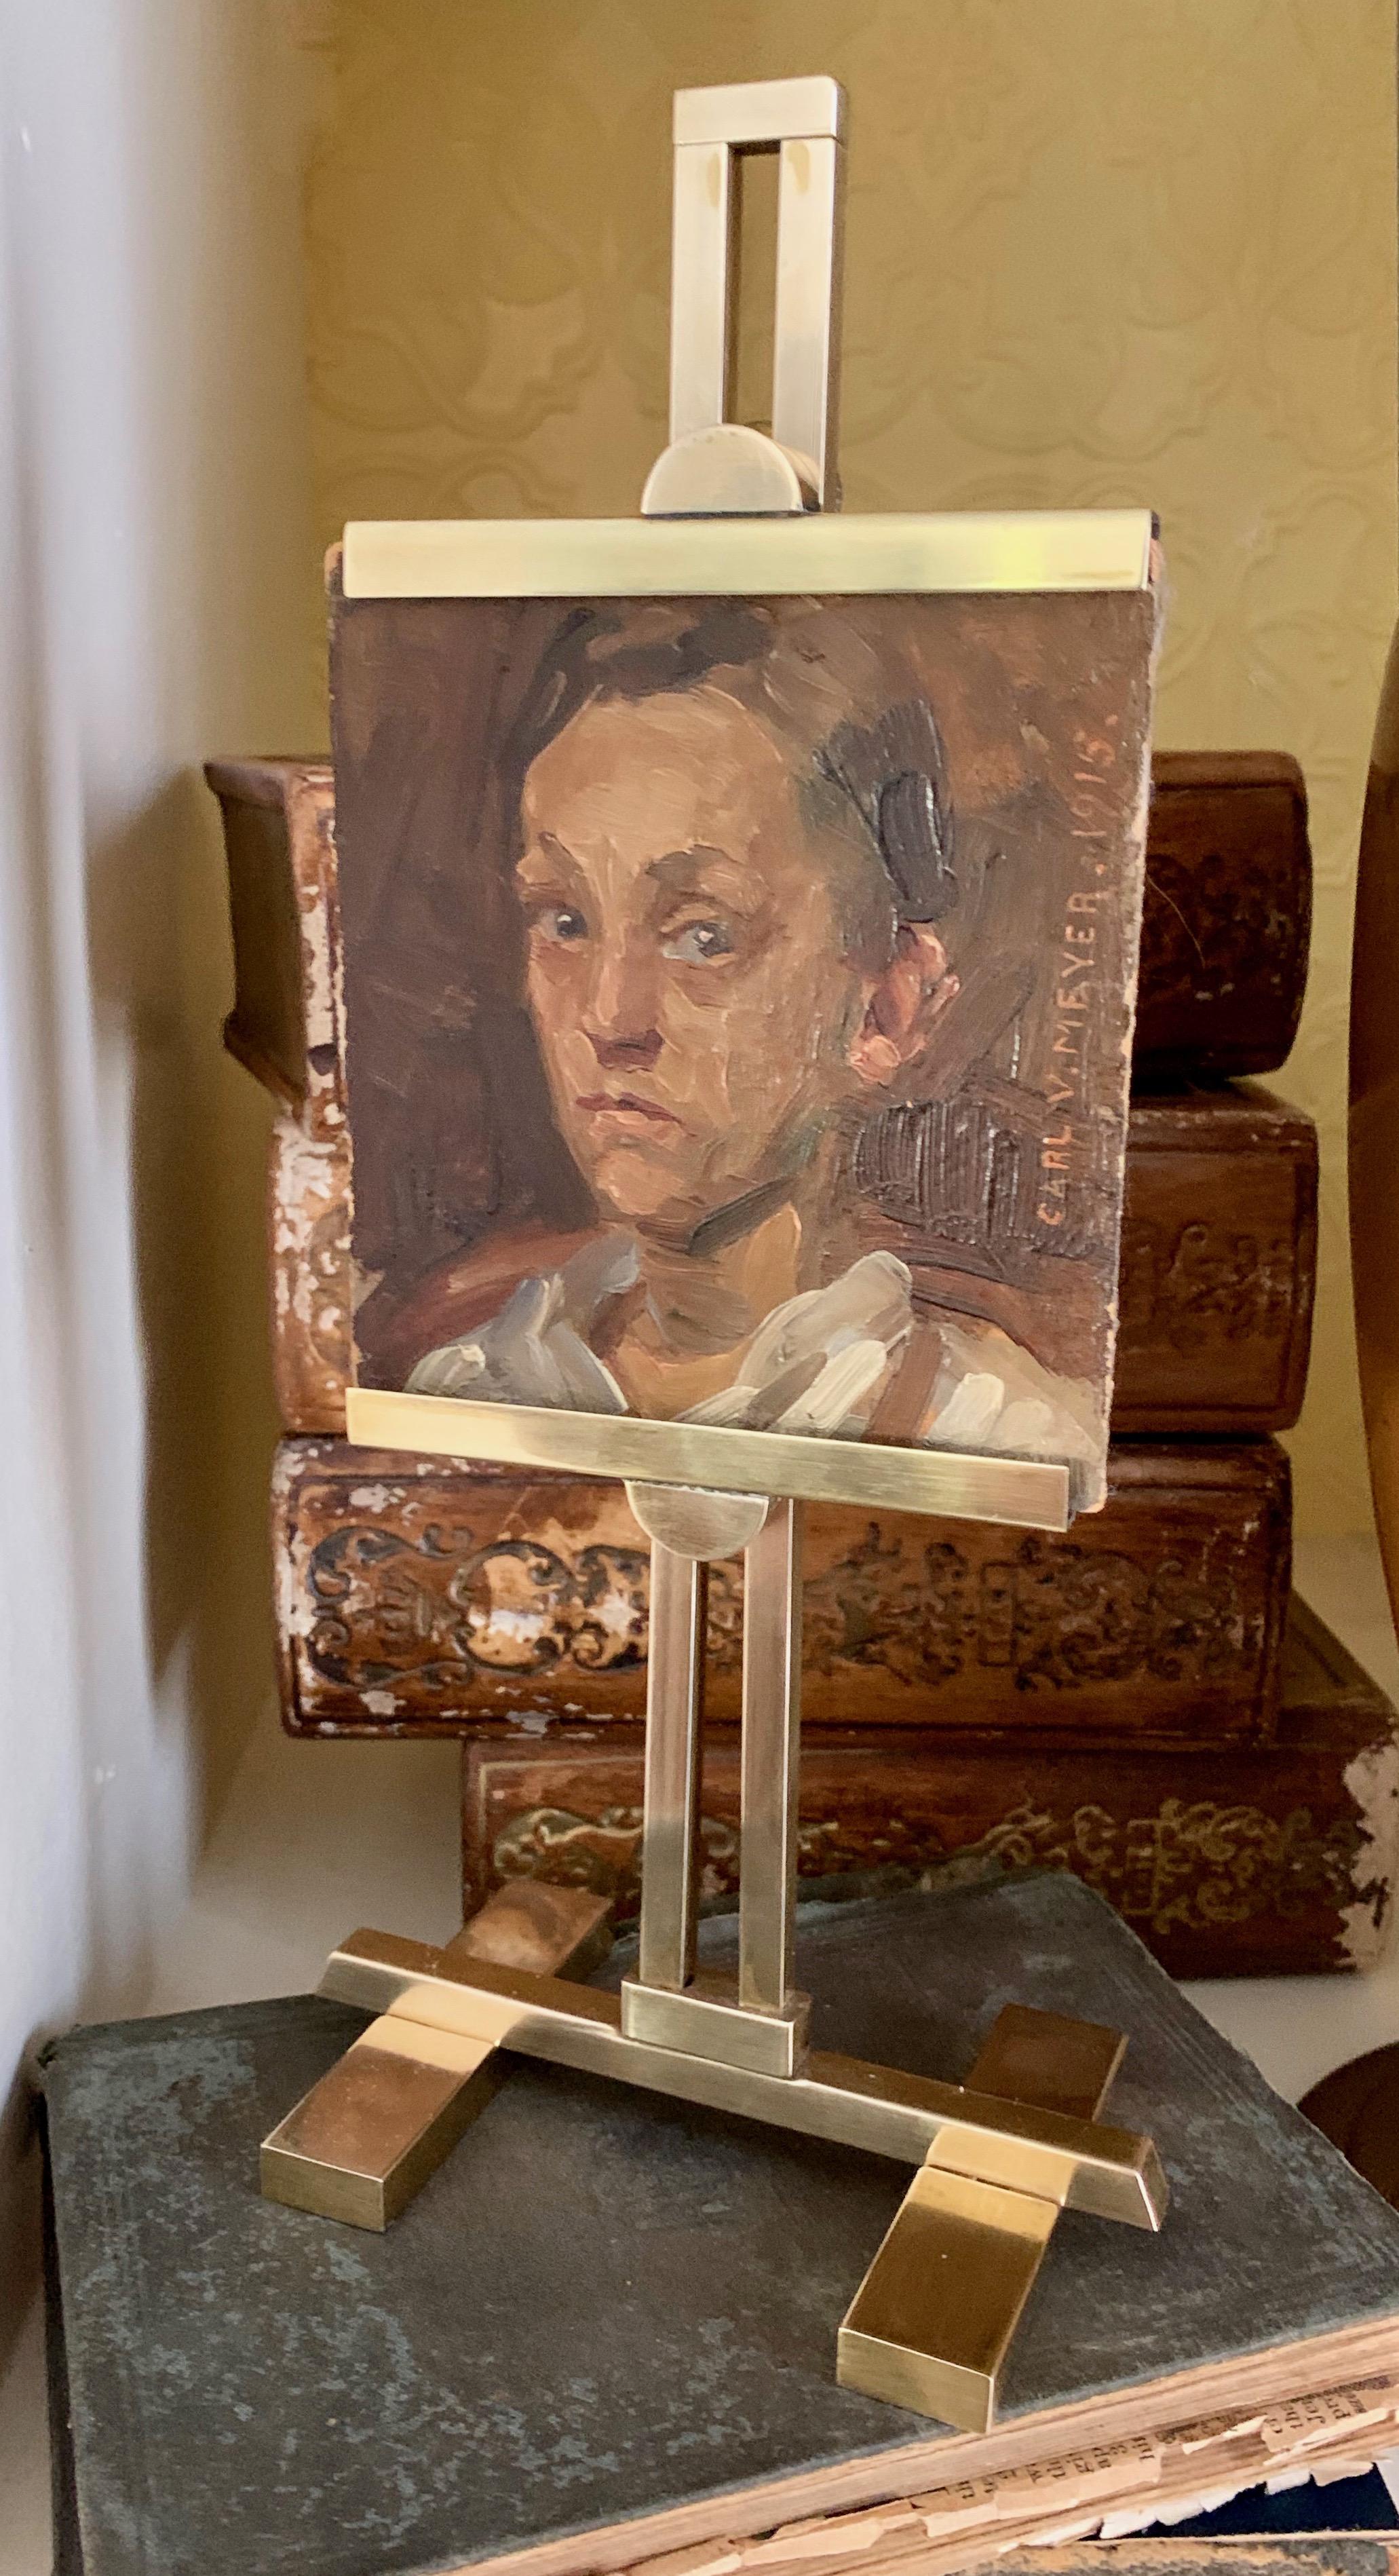 A painting of a boy by Carl Vilhelm Meyer on Board and displayed in a miniature brass desk easel a wonderful addition to any shelf or desk and a great conversation piece. Meyer is an important and listed artist.

Painting is 4.25